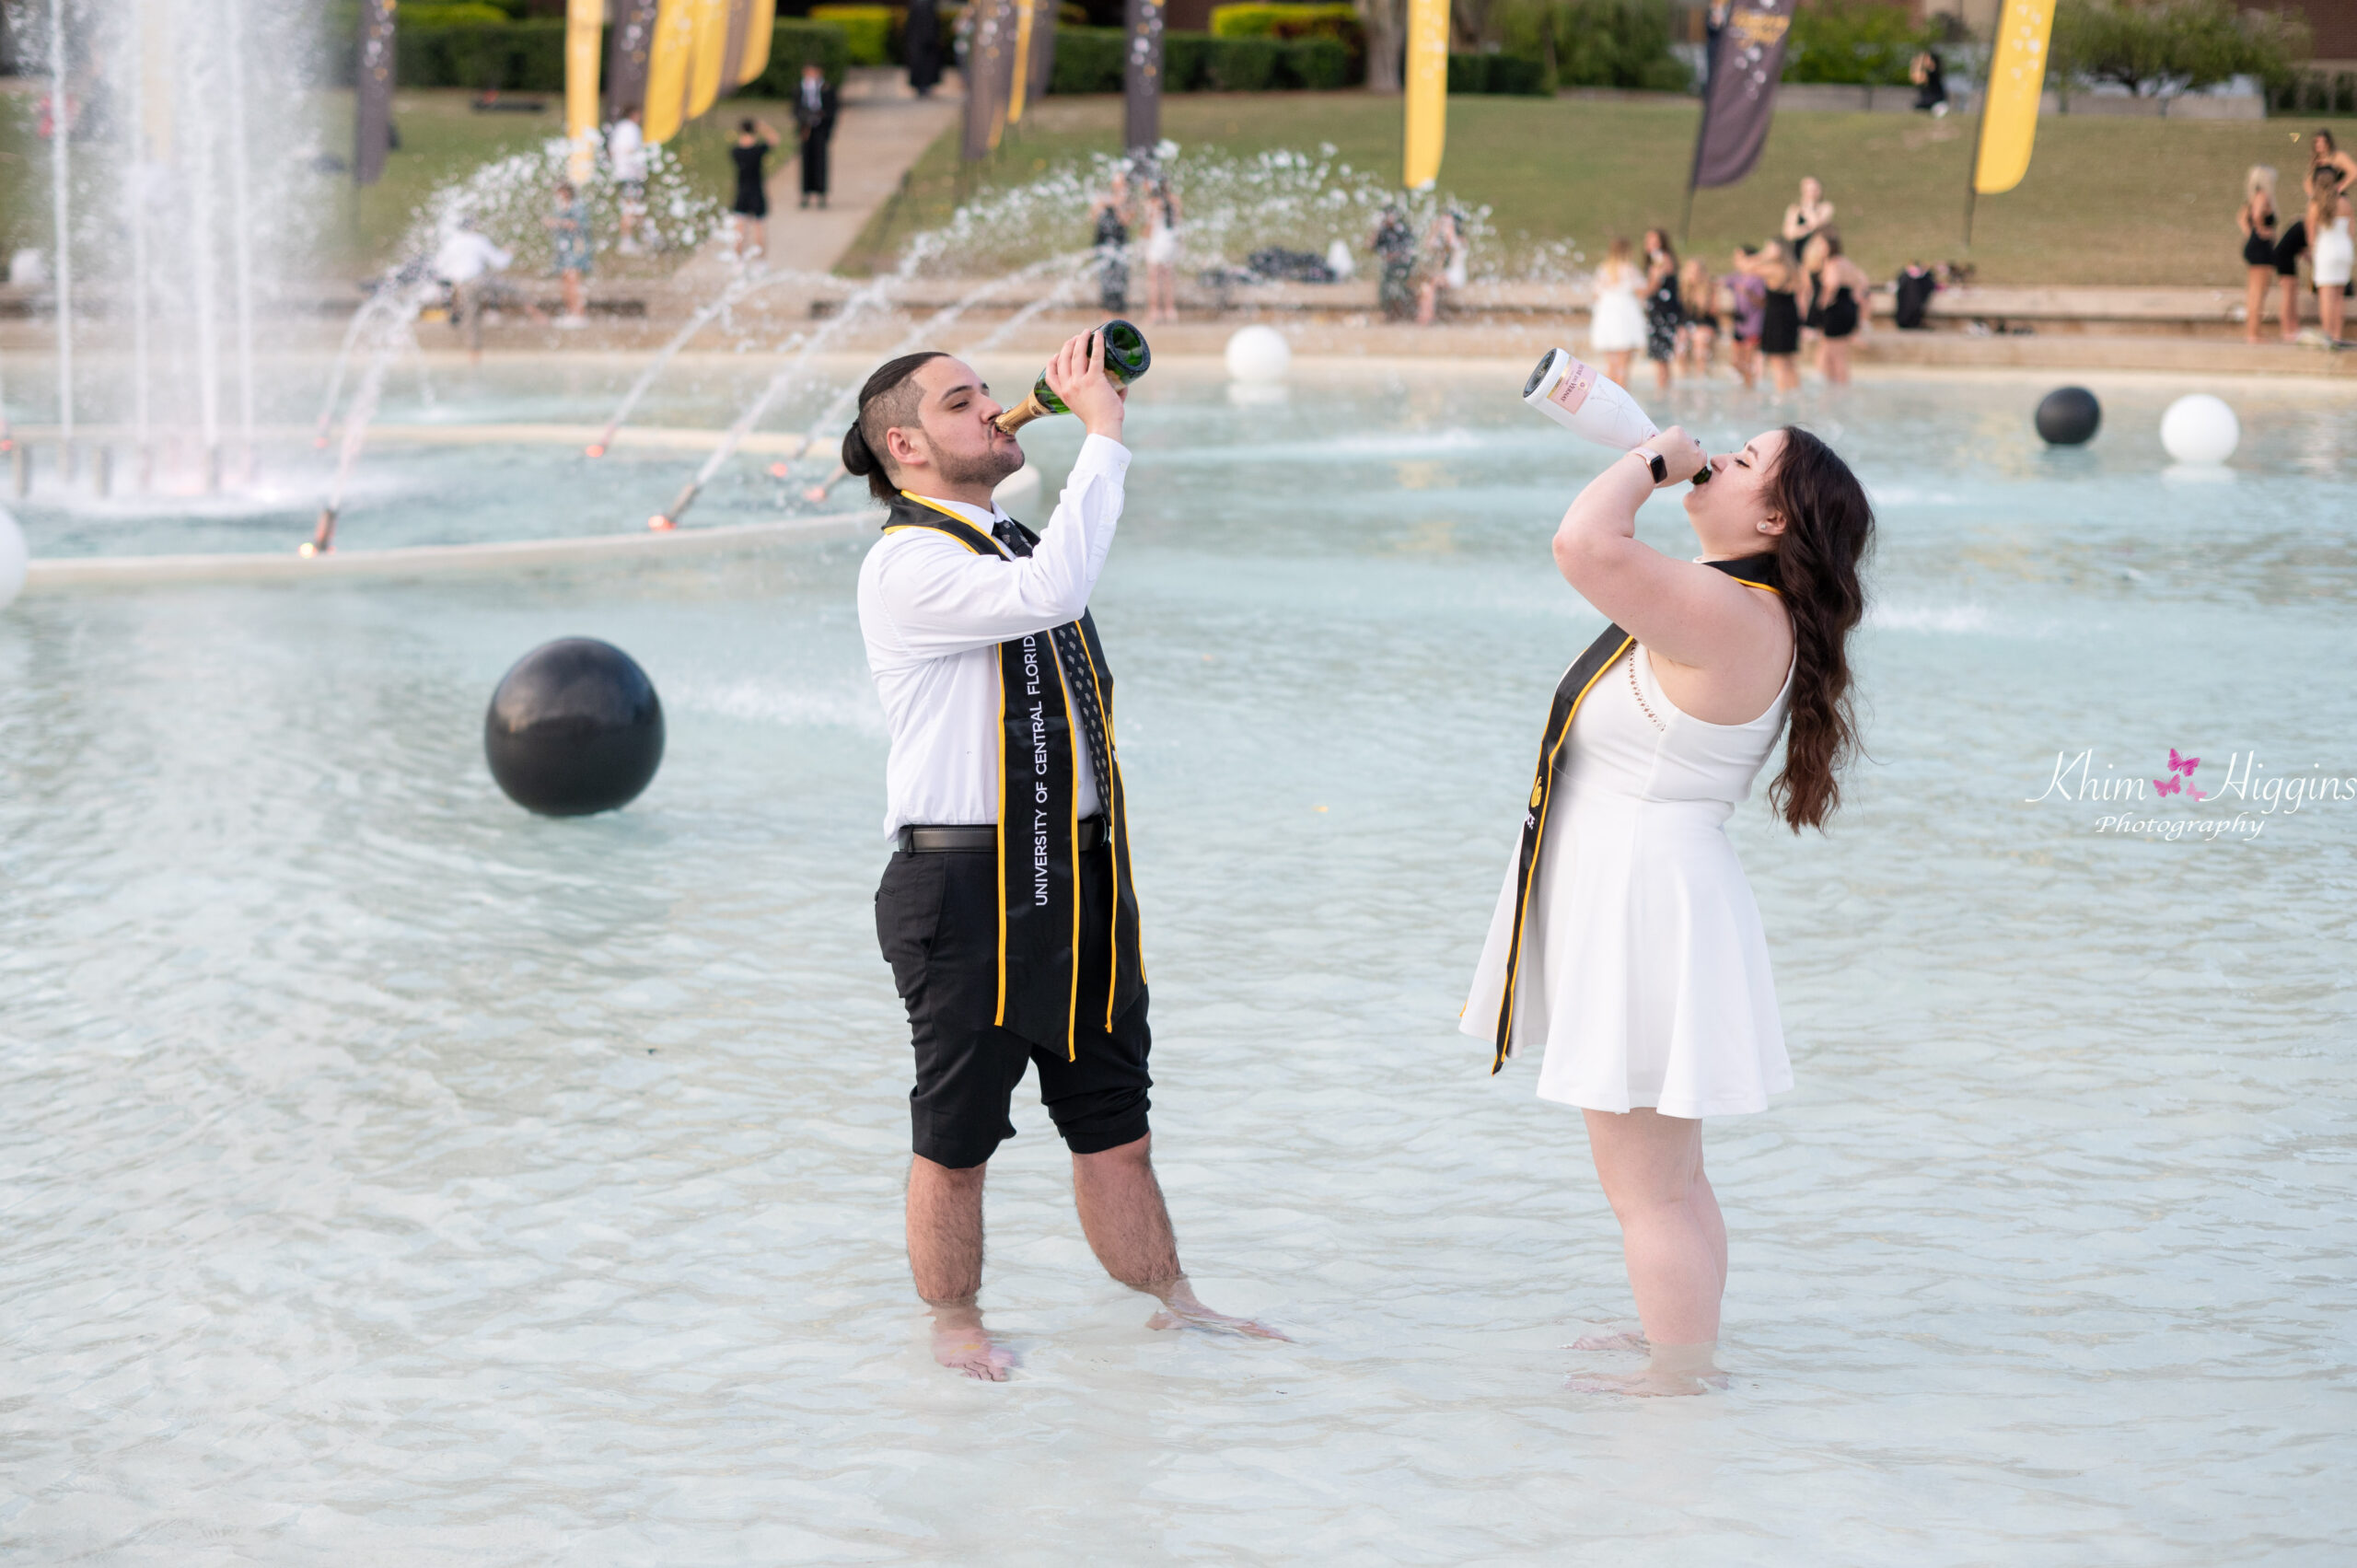 A guy and a girl standing in a fountain drinking a bottle of champagne while UCF Graduation Photographer Khim Higgins takes their photos.